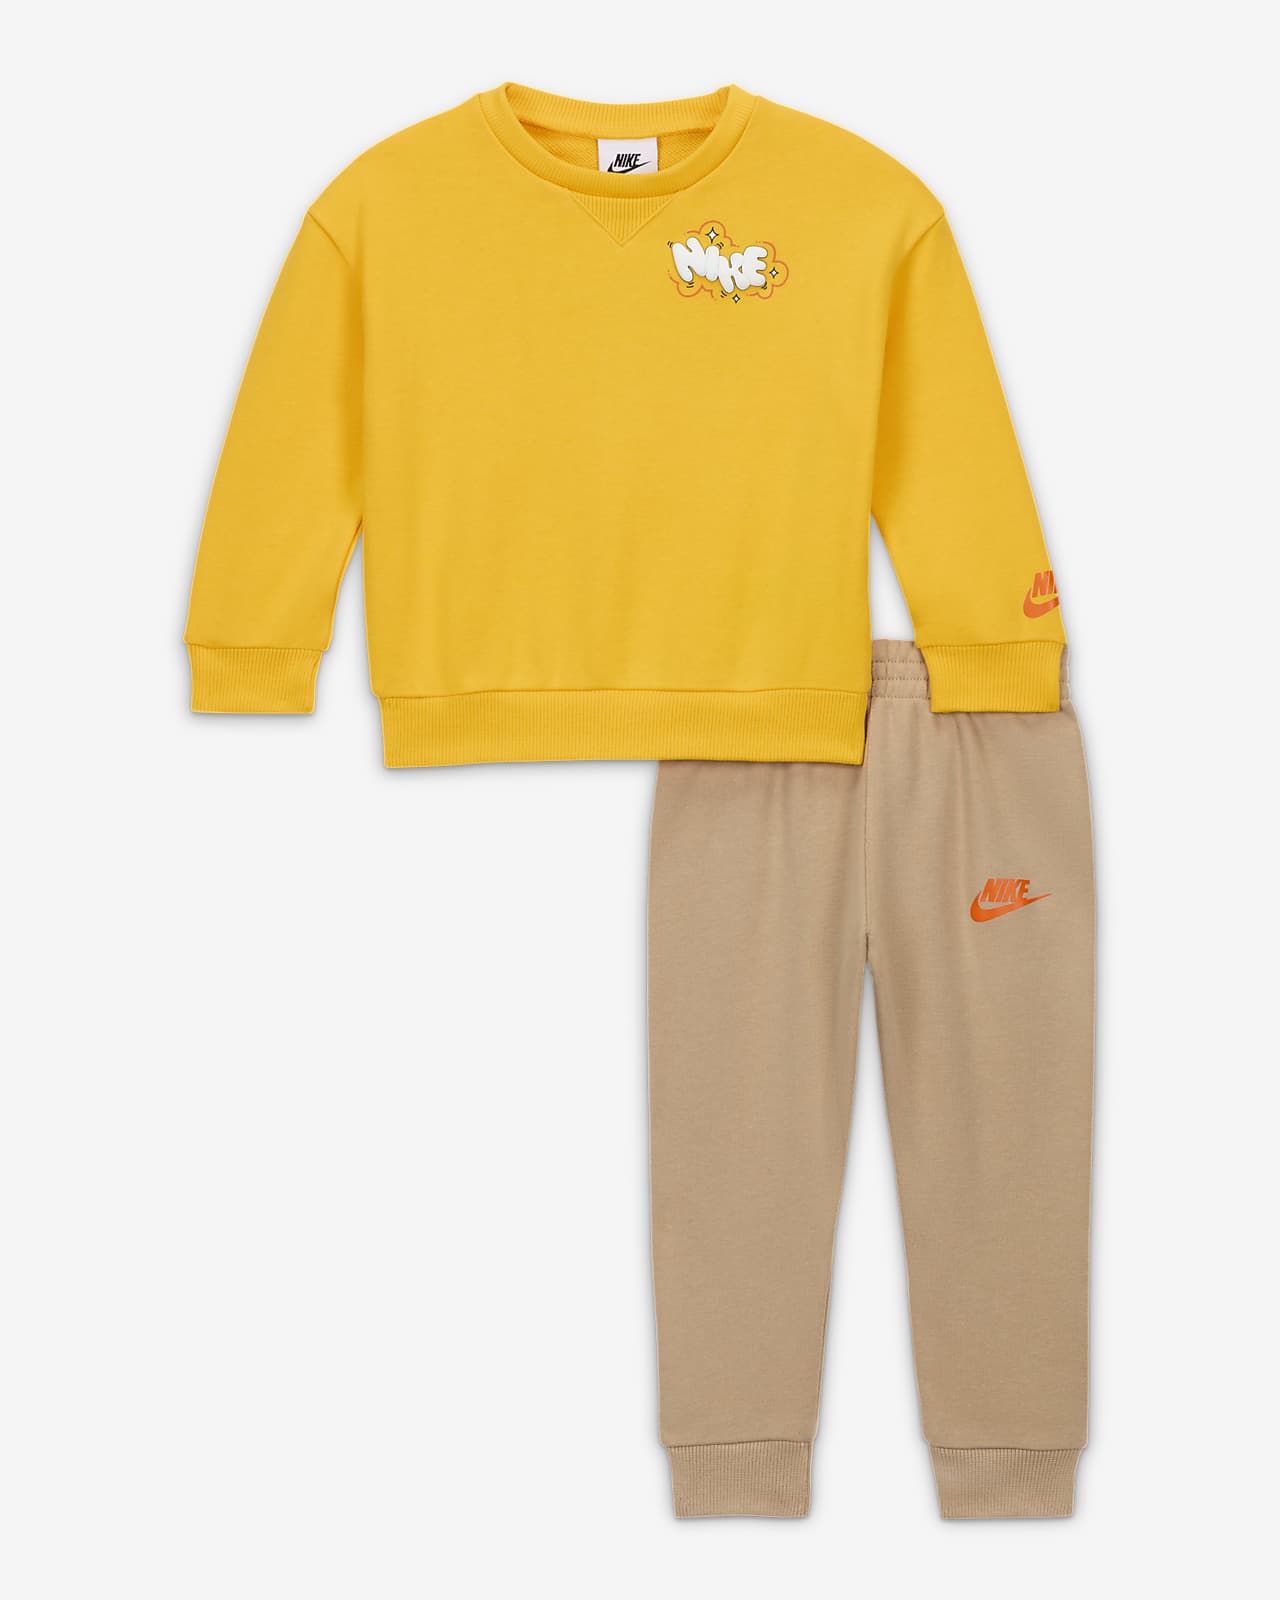 Nike Sportswear Create Your Own Adventure Baby (12-24M) French Terry Graphic Crew Set